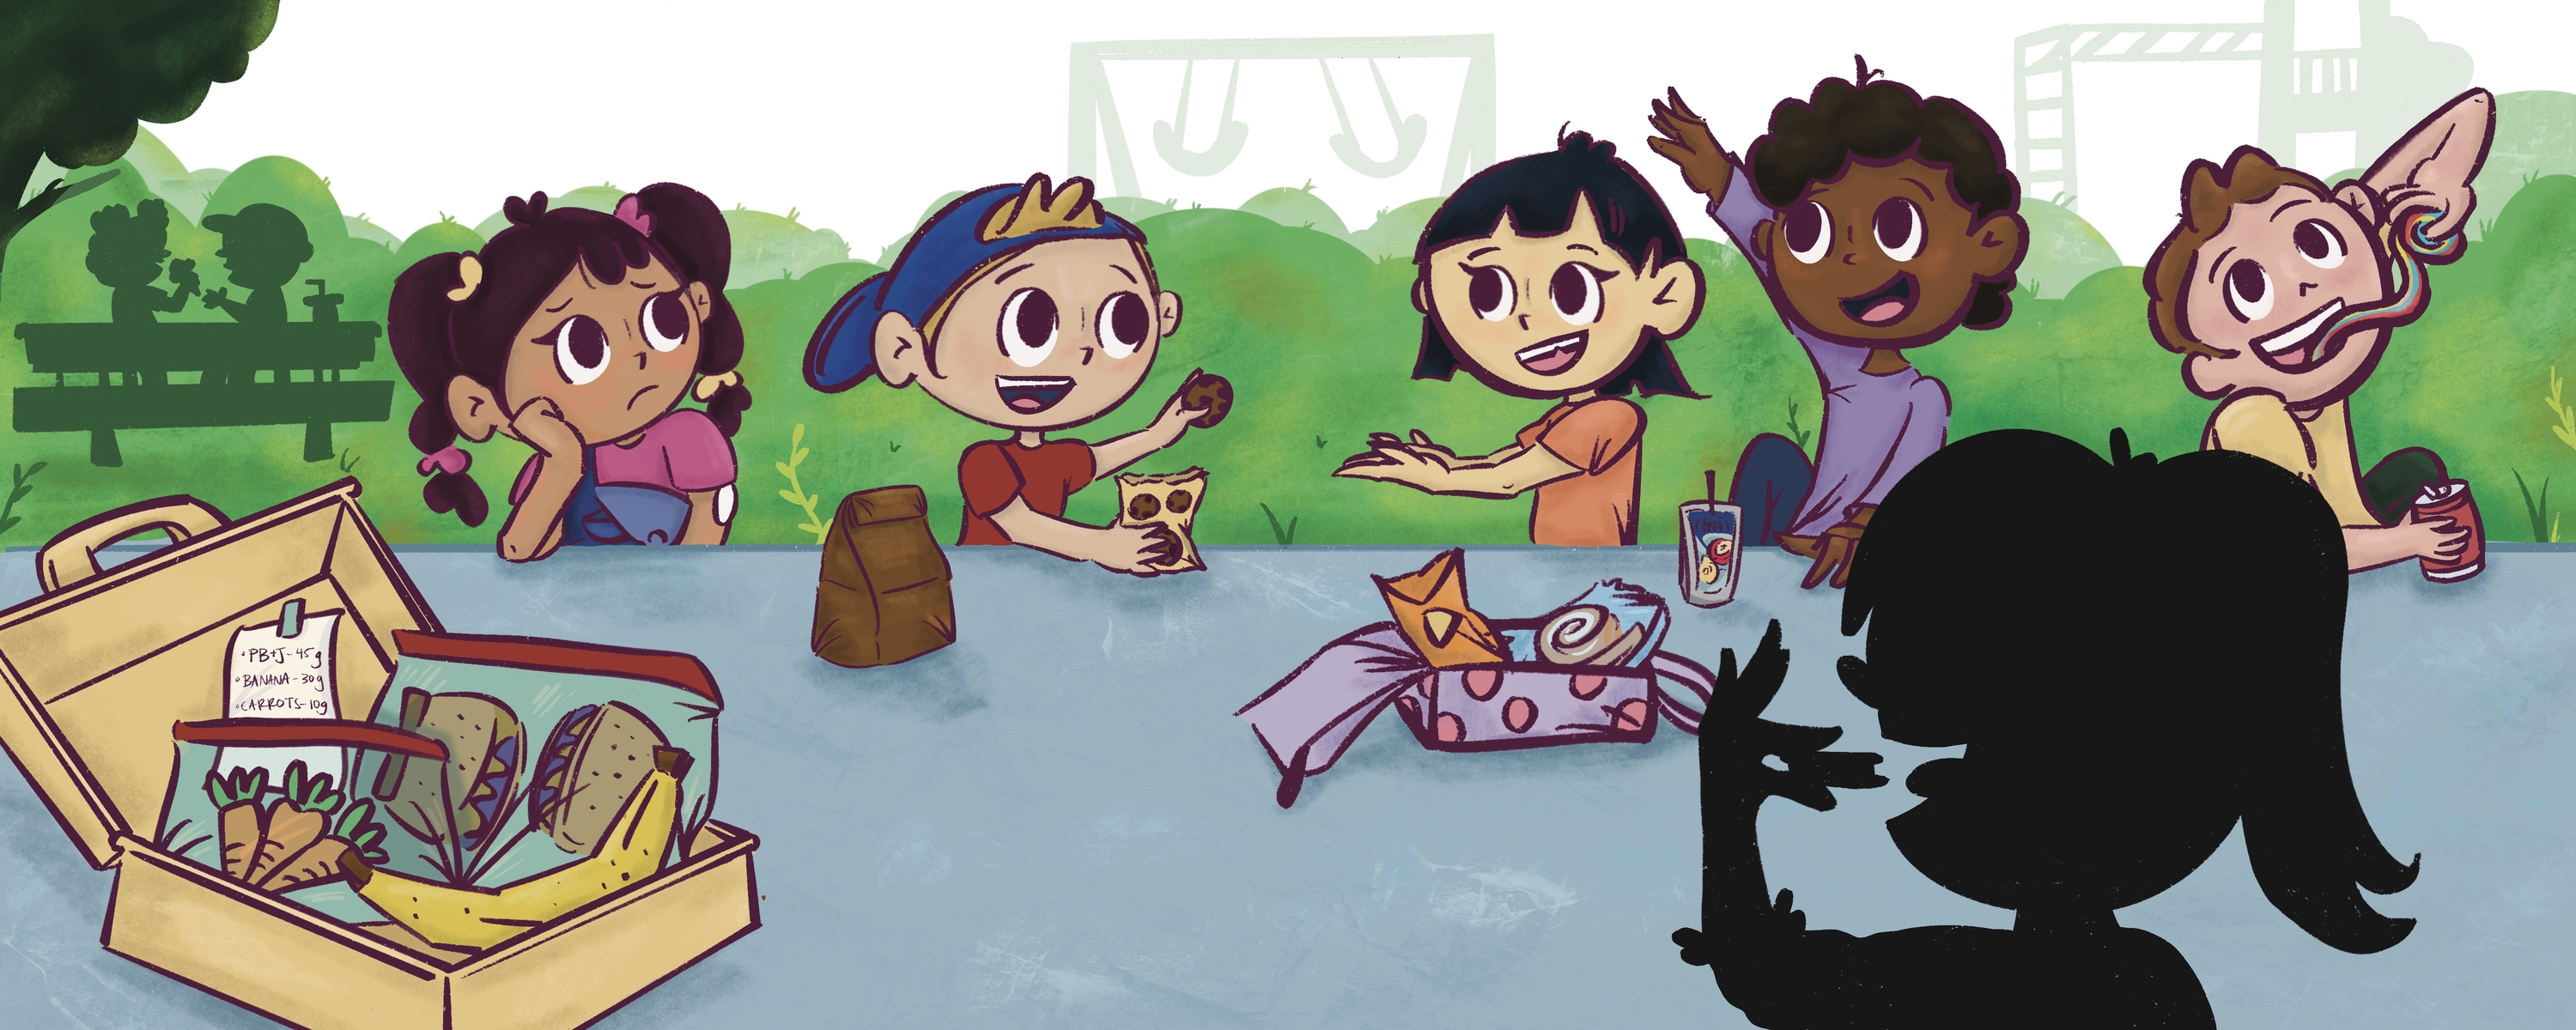 Spread of kids eating during Recess from children's book 'Diabuddies"